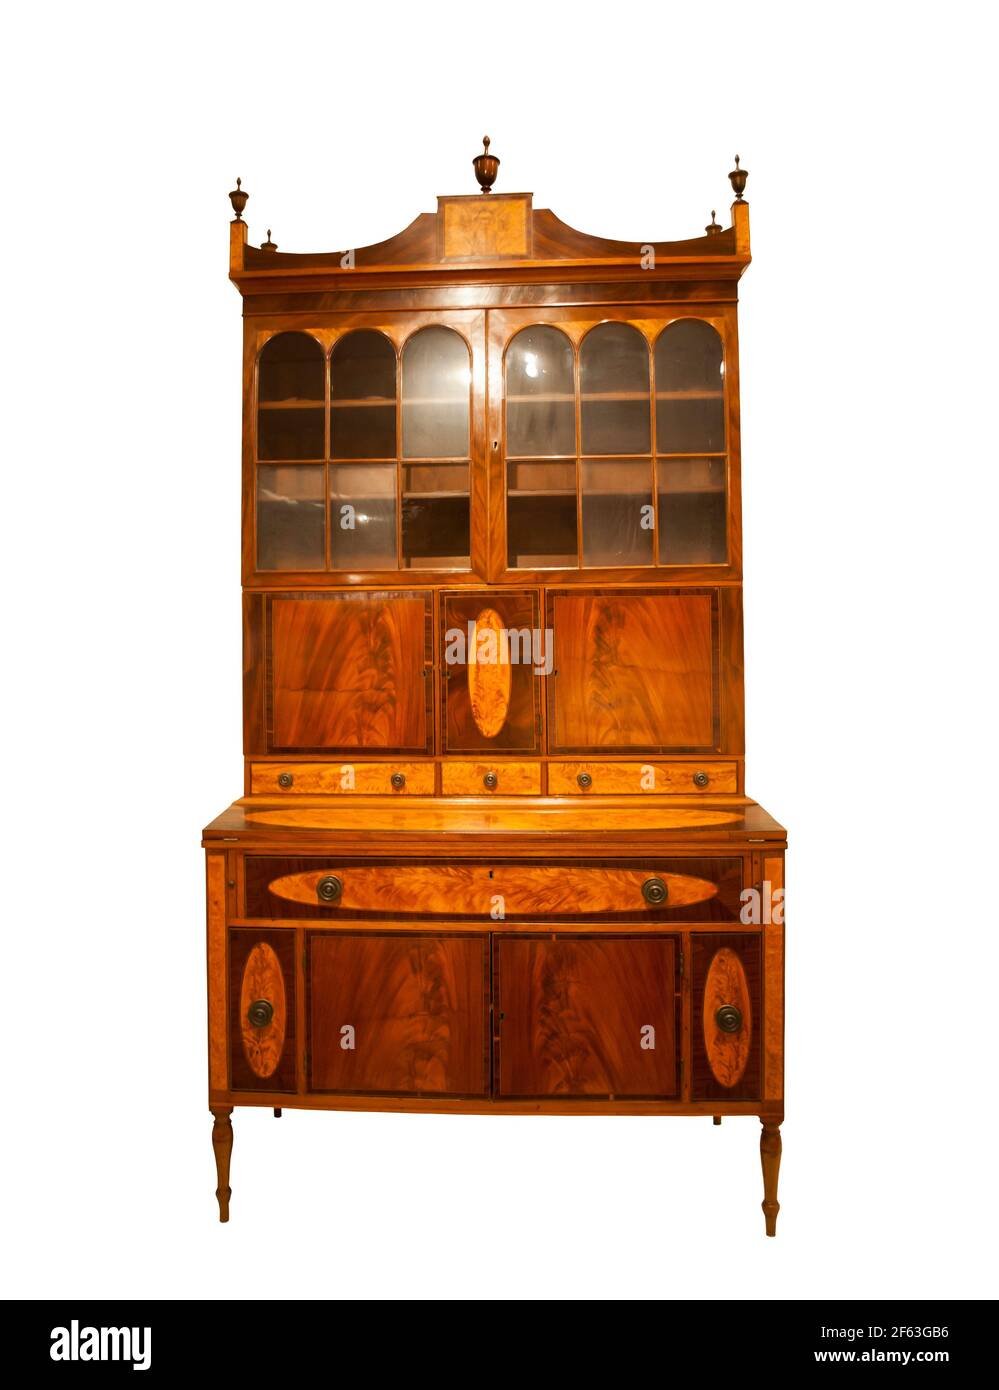 Antique mahogany cupboard in colonial style, handmade. Stock Photo